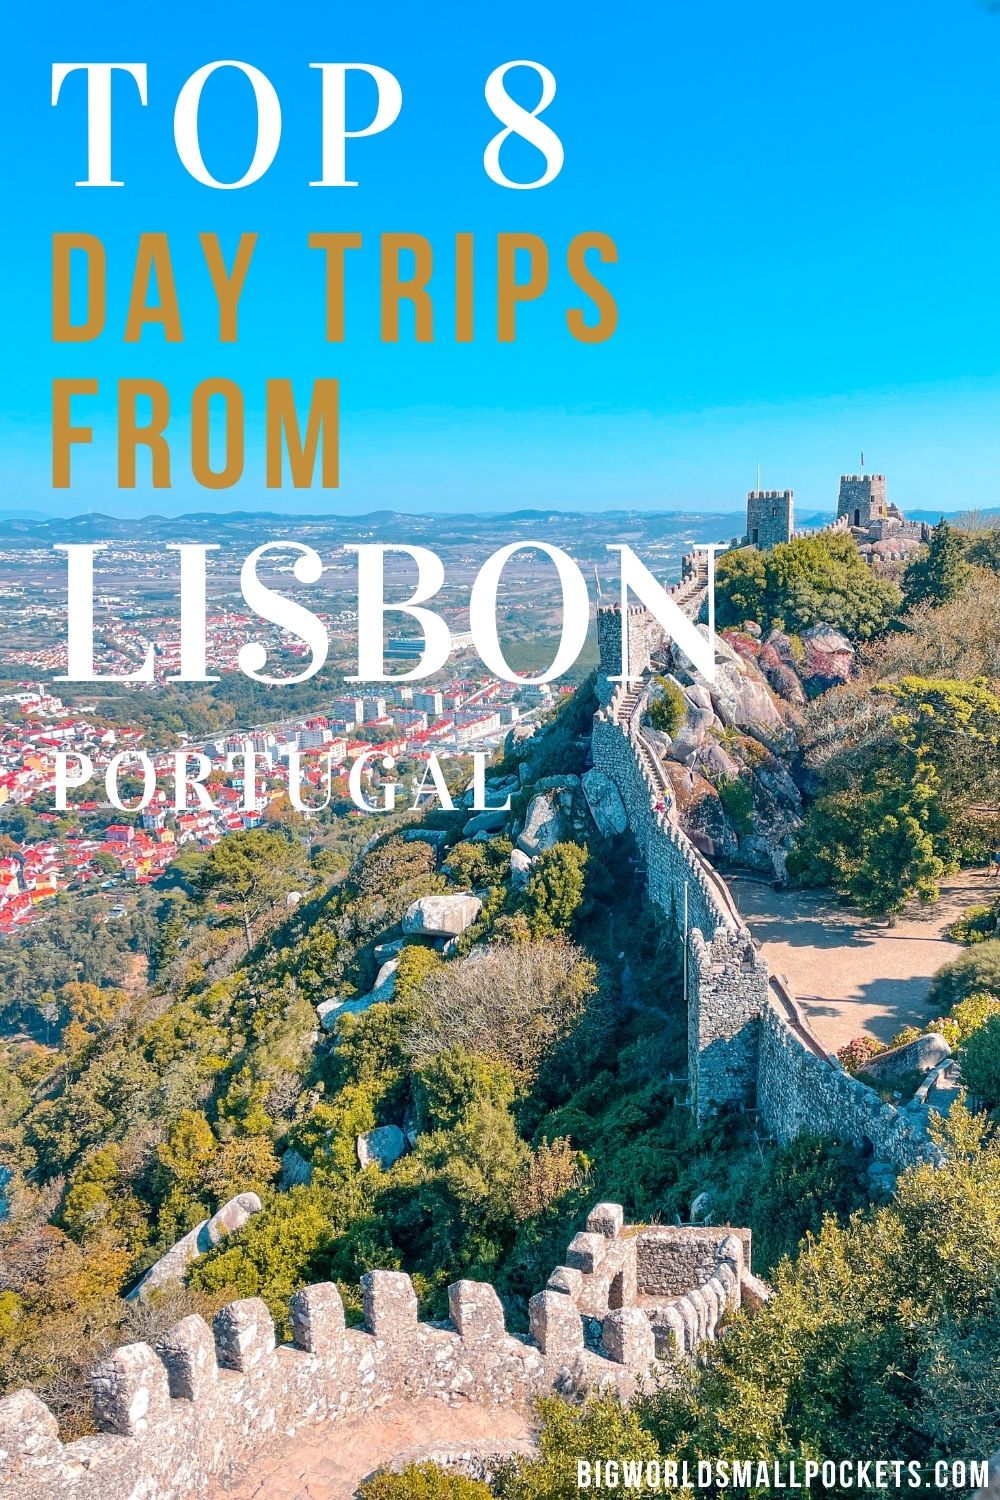 Top 8 Day Trips from Lisbon, Portugal